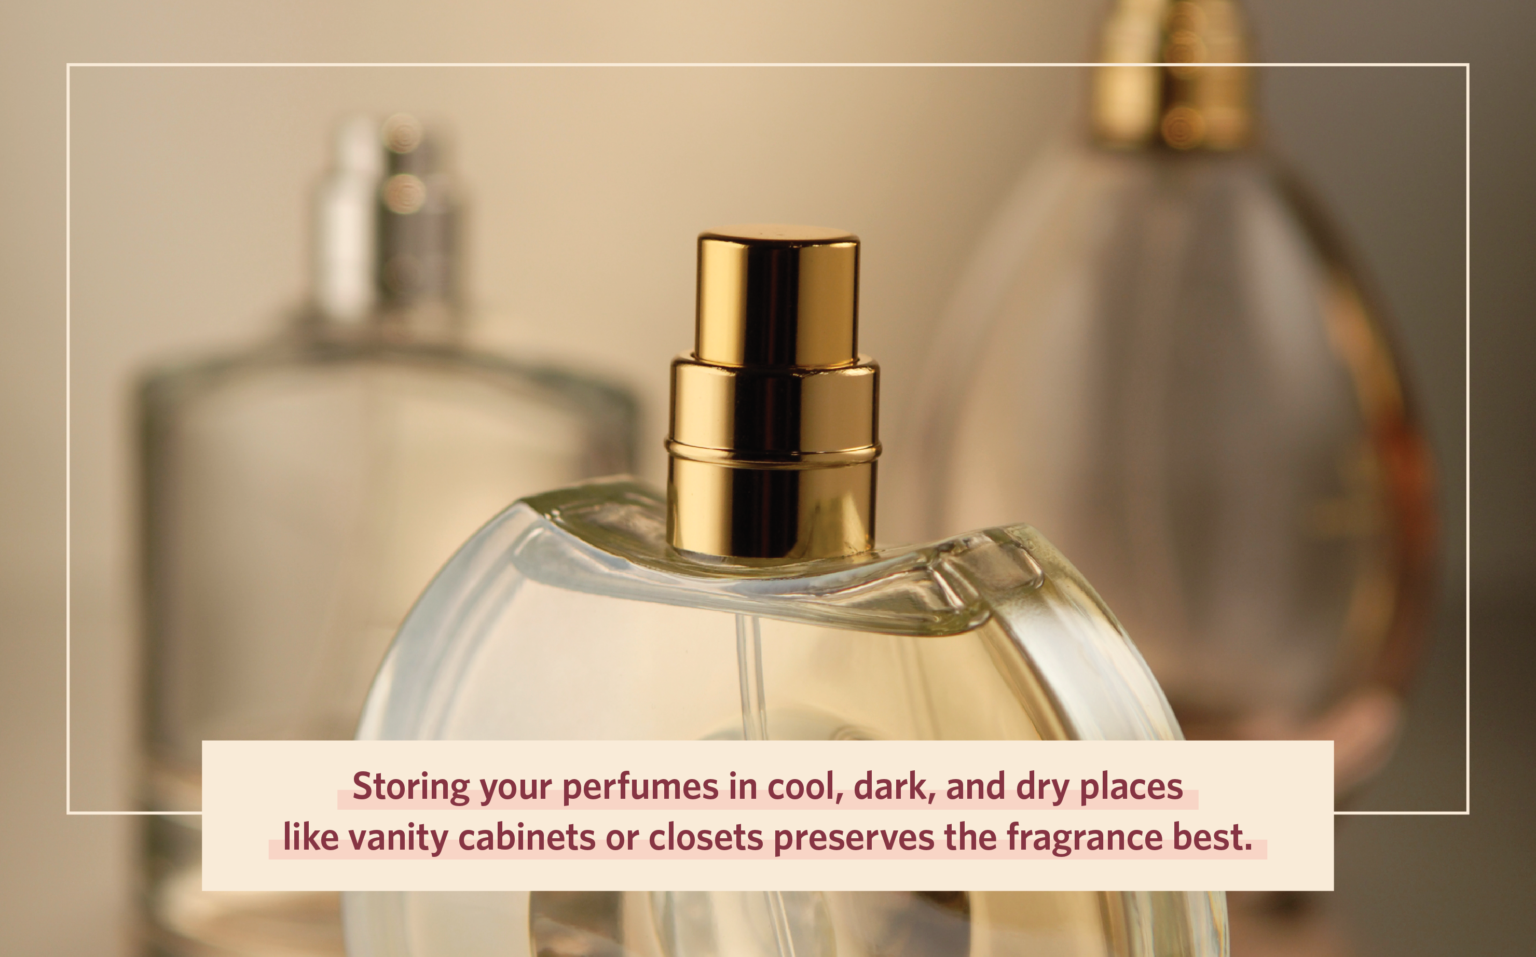 Find out the perfumes which our fragrances are most similar to